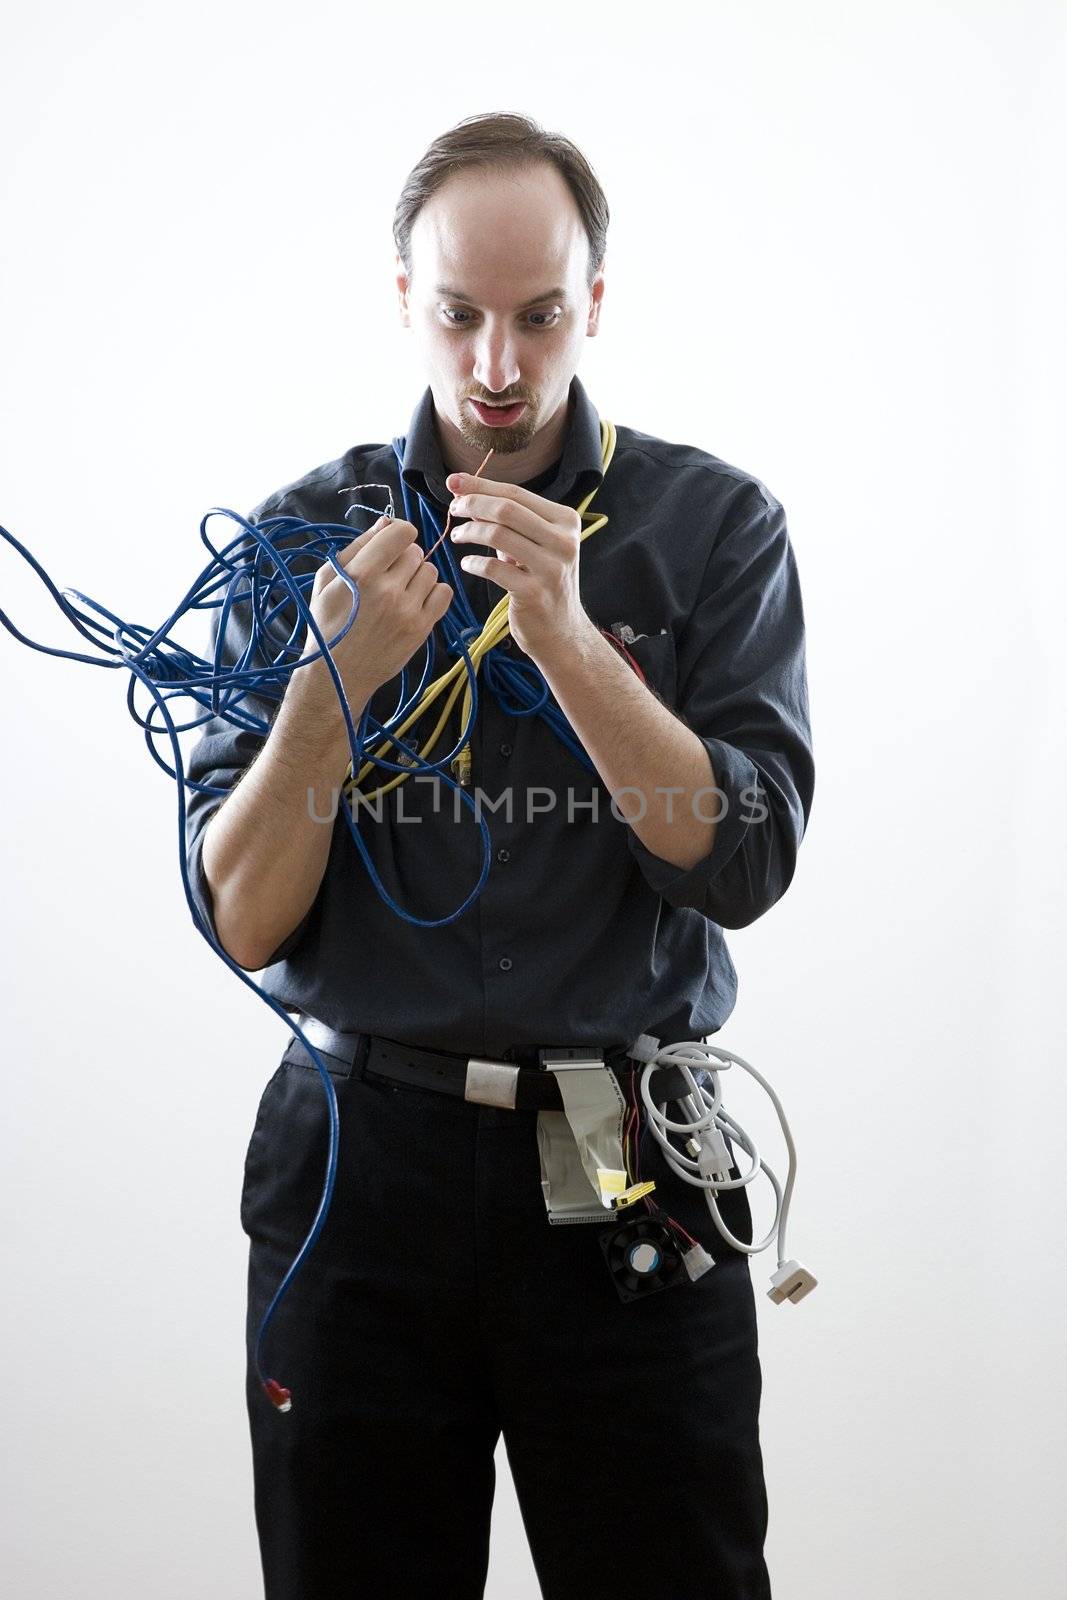 Dumb technician surprise by wires in his hand